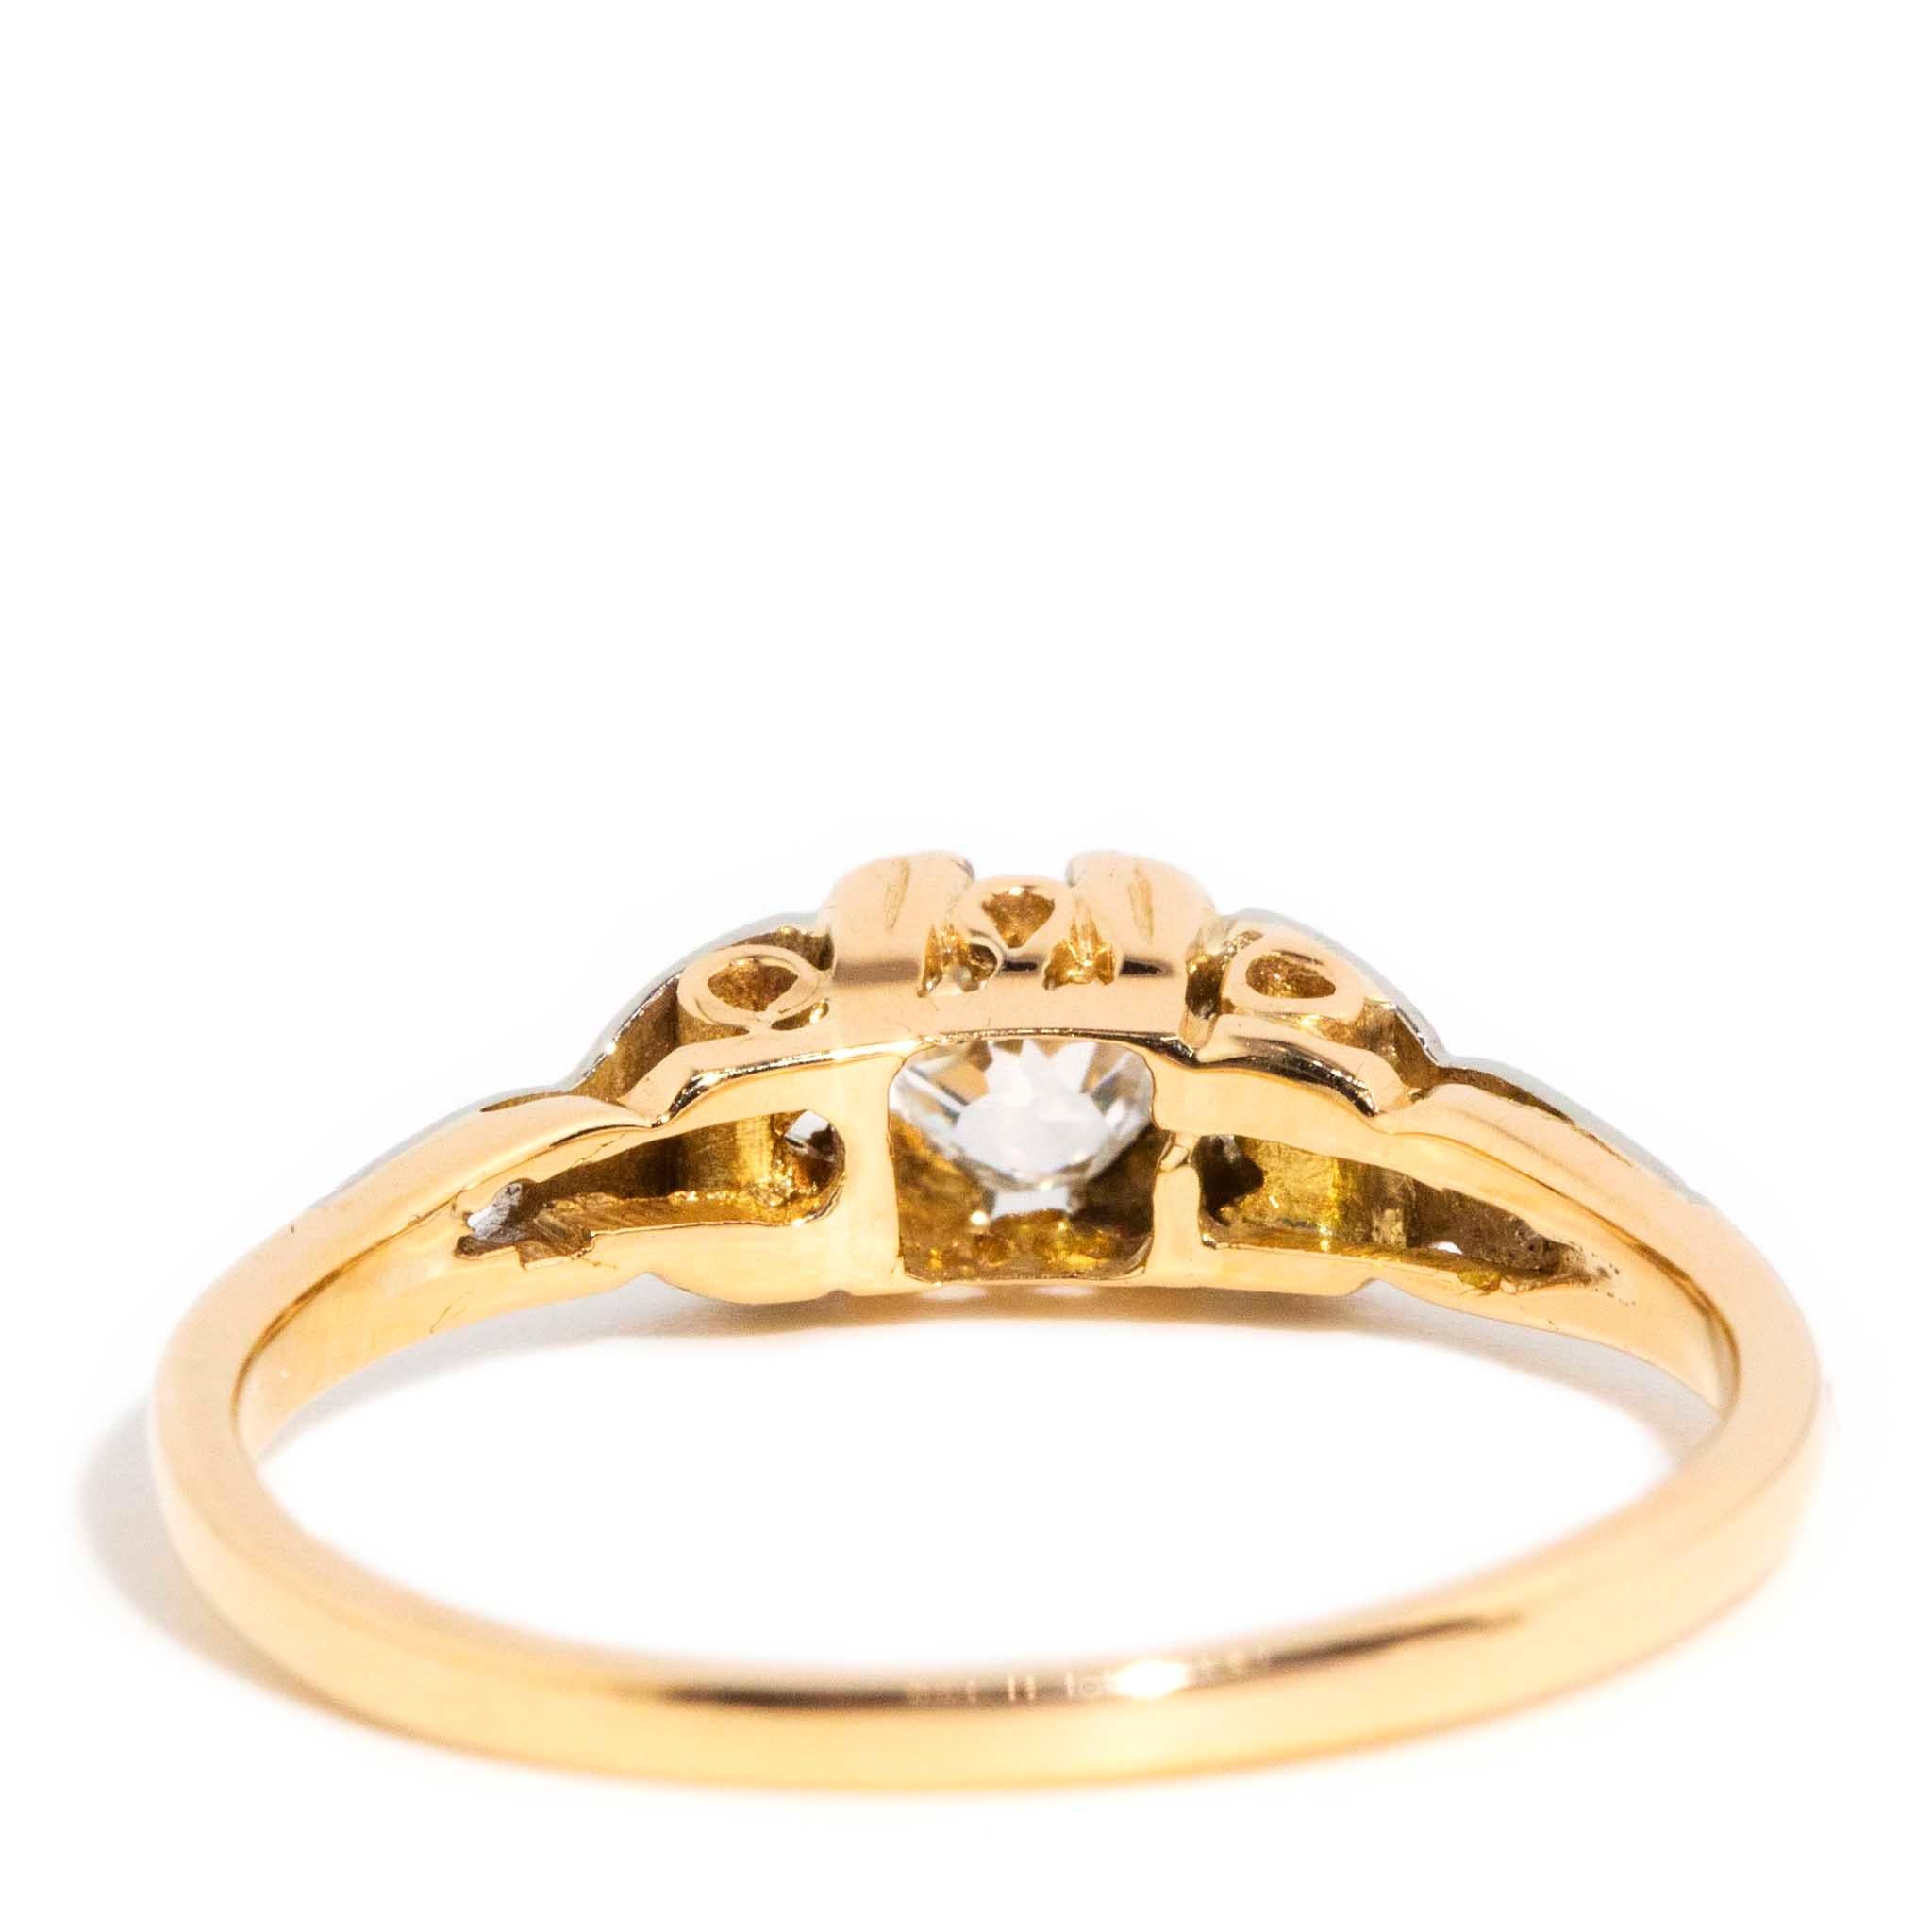 Vintage Circa 1930s Old Cut Diamond Solitaire Ring 15 Carat Yellow & White Gold For Sale 1